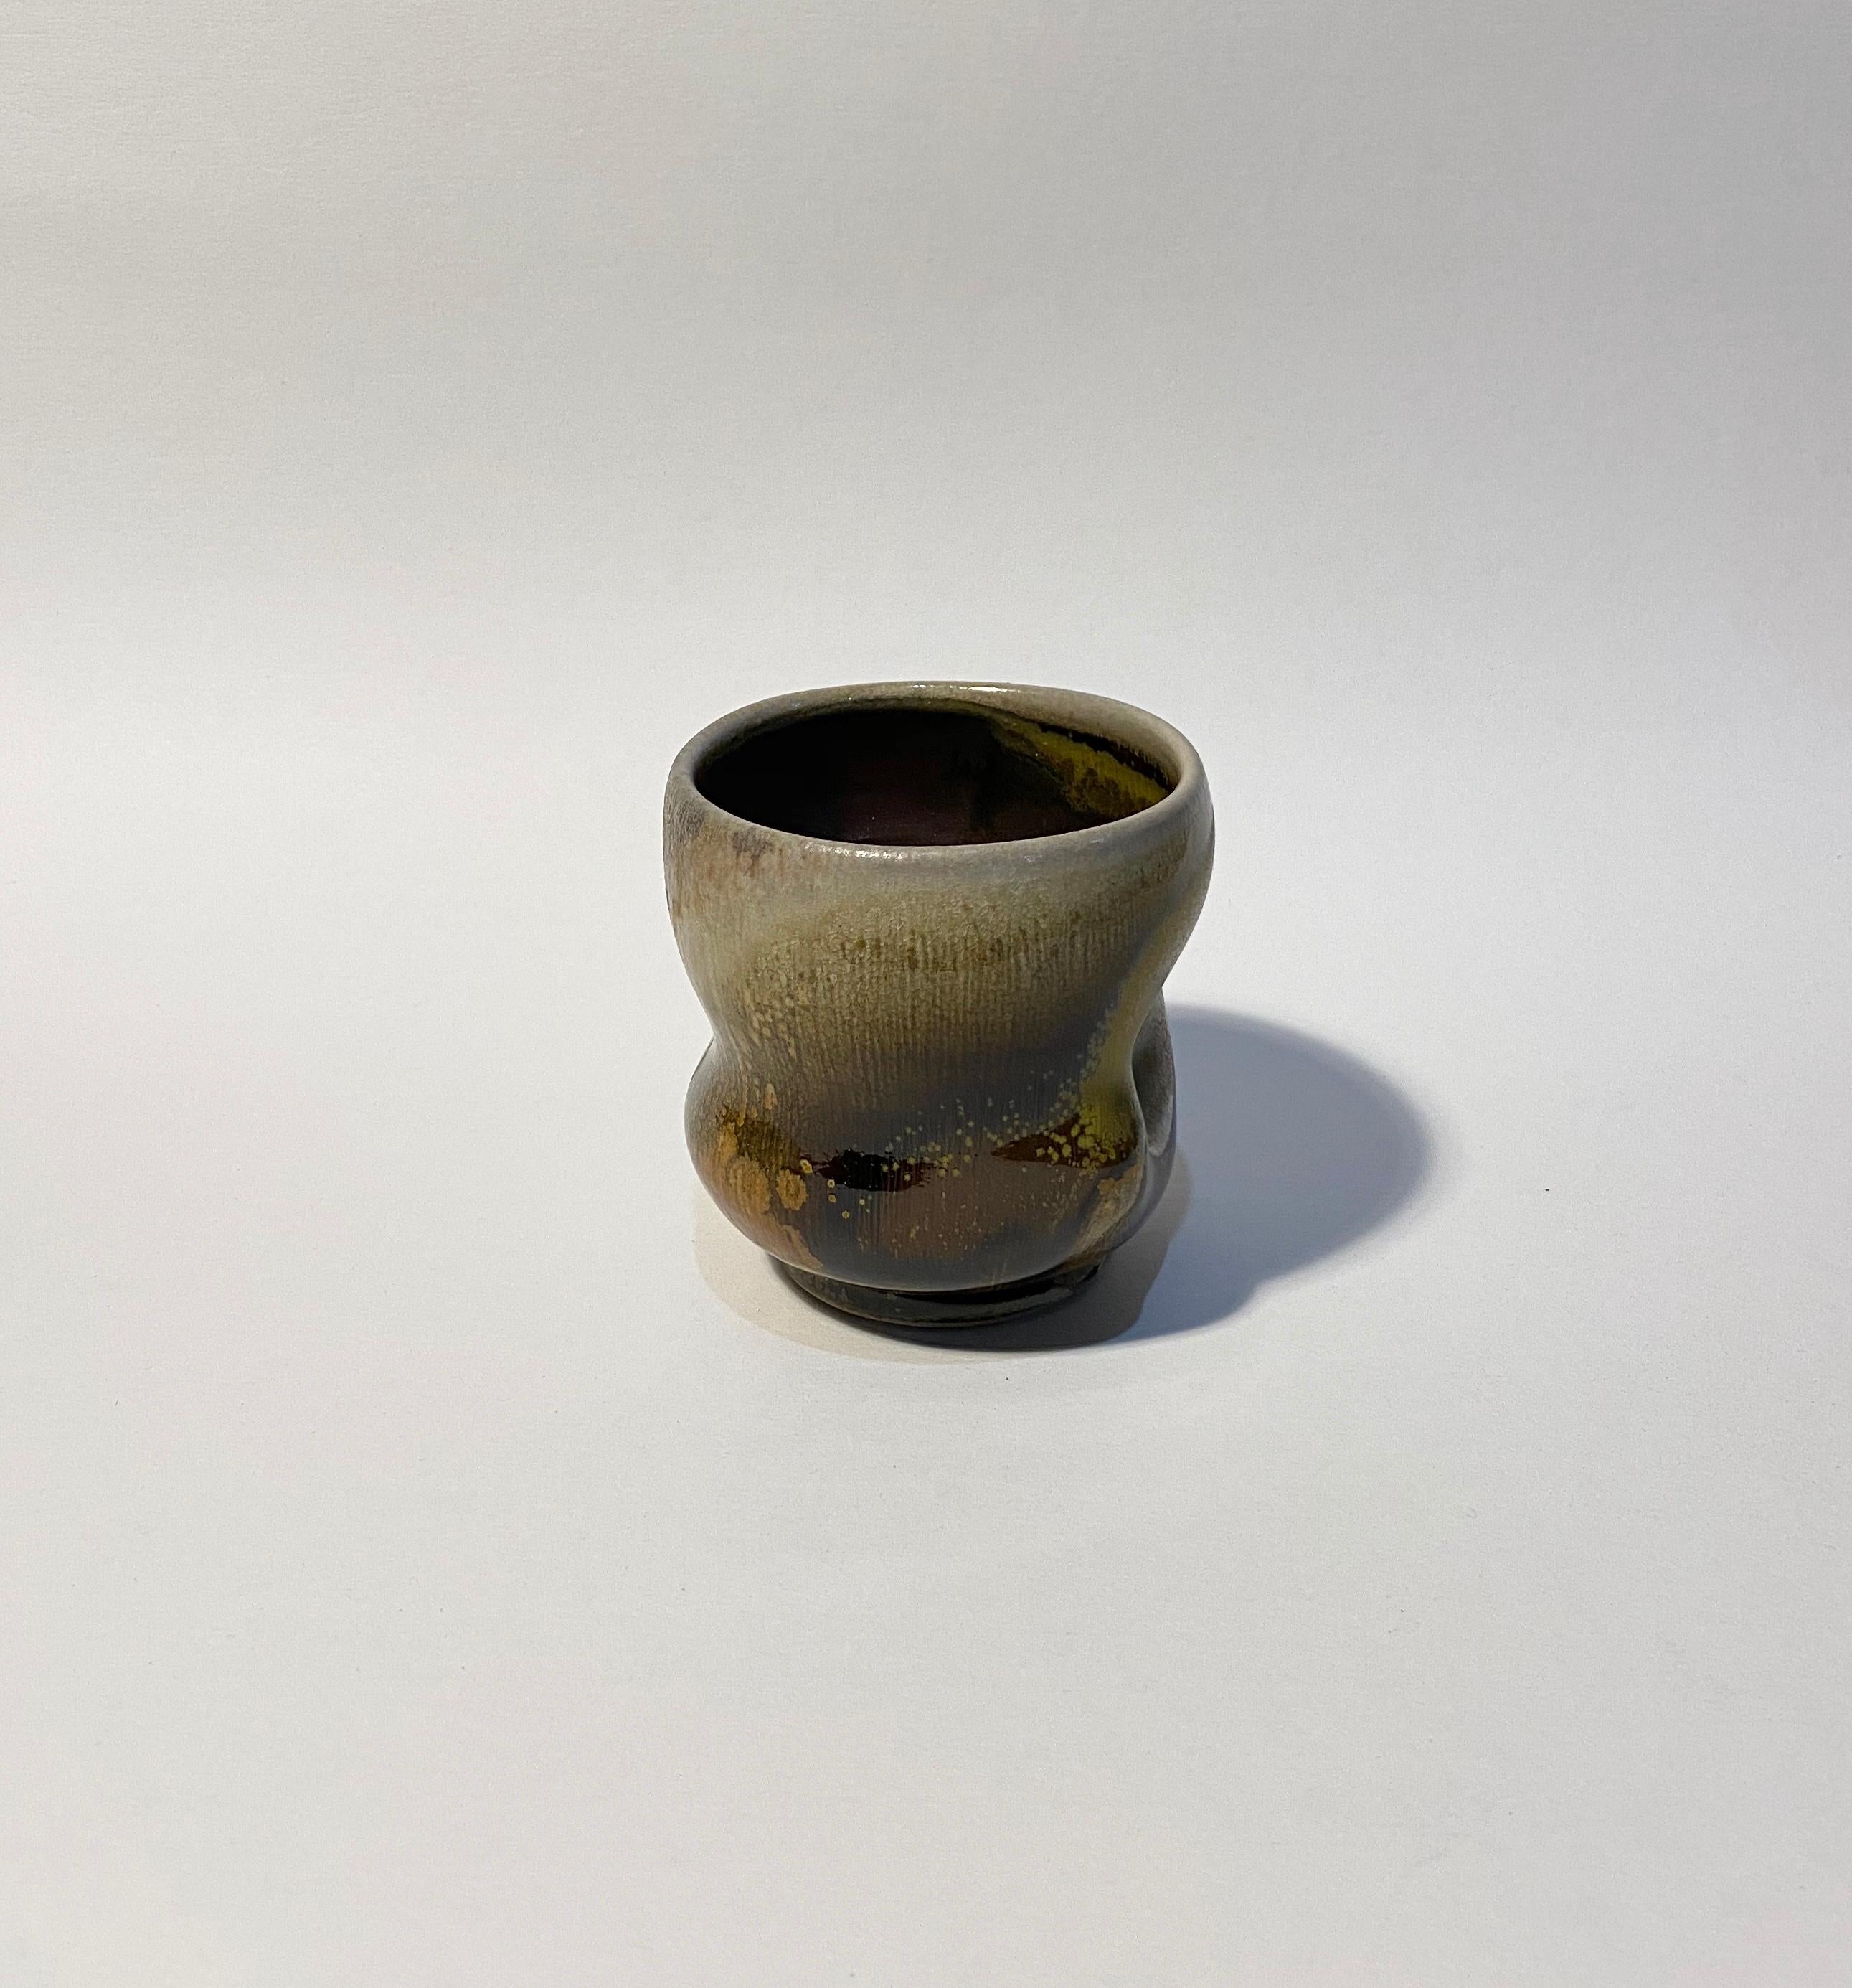 Chris Gustin (born 1952)
Whiskey cup, 2019
Stoneware
Measures: 3 5/8 x 4 x 3 1/2 inches
Anagama wood fired
Signed on the underside with the artist's device

Chris Gustin is a studio artist and Emeritus Professor at the University of